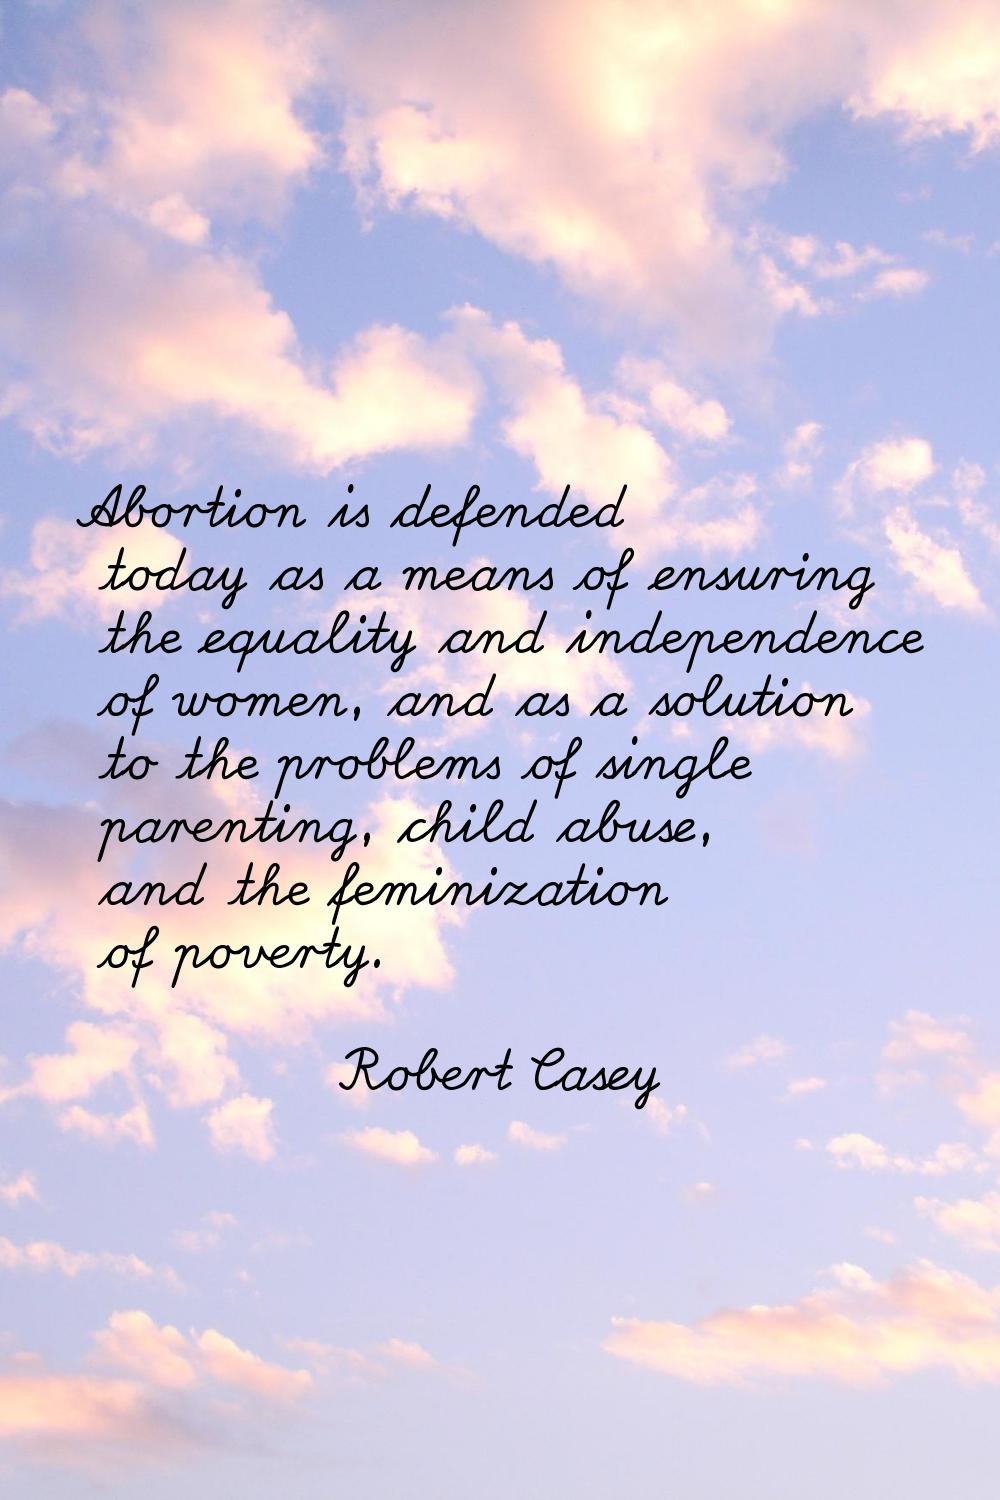 Abortion is defended today as a means of ensuring the equality and independence of women, and as a 